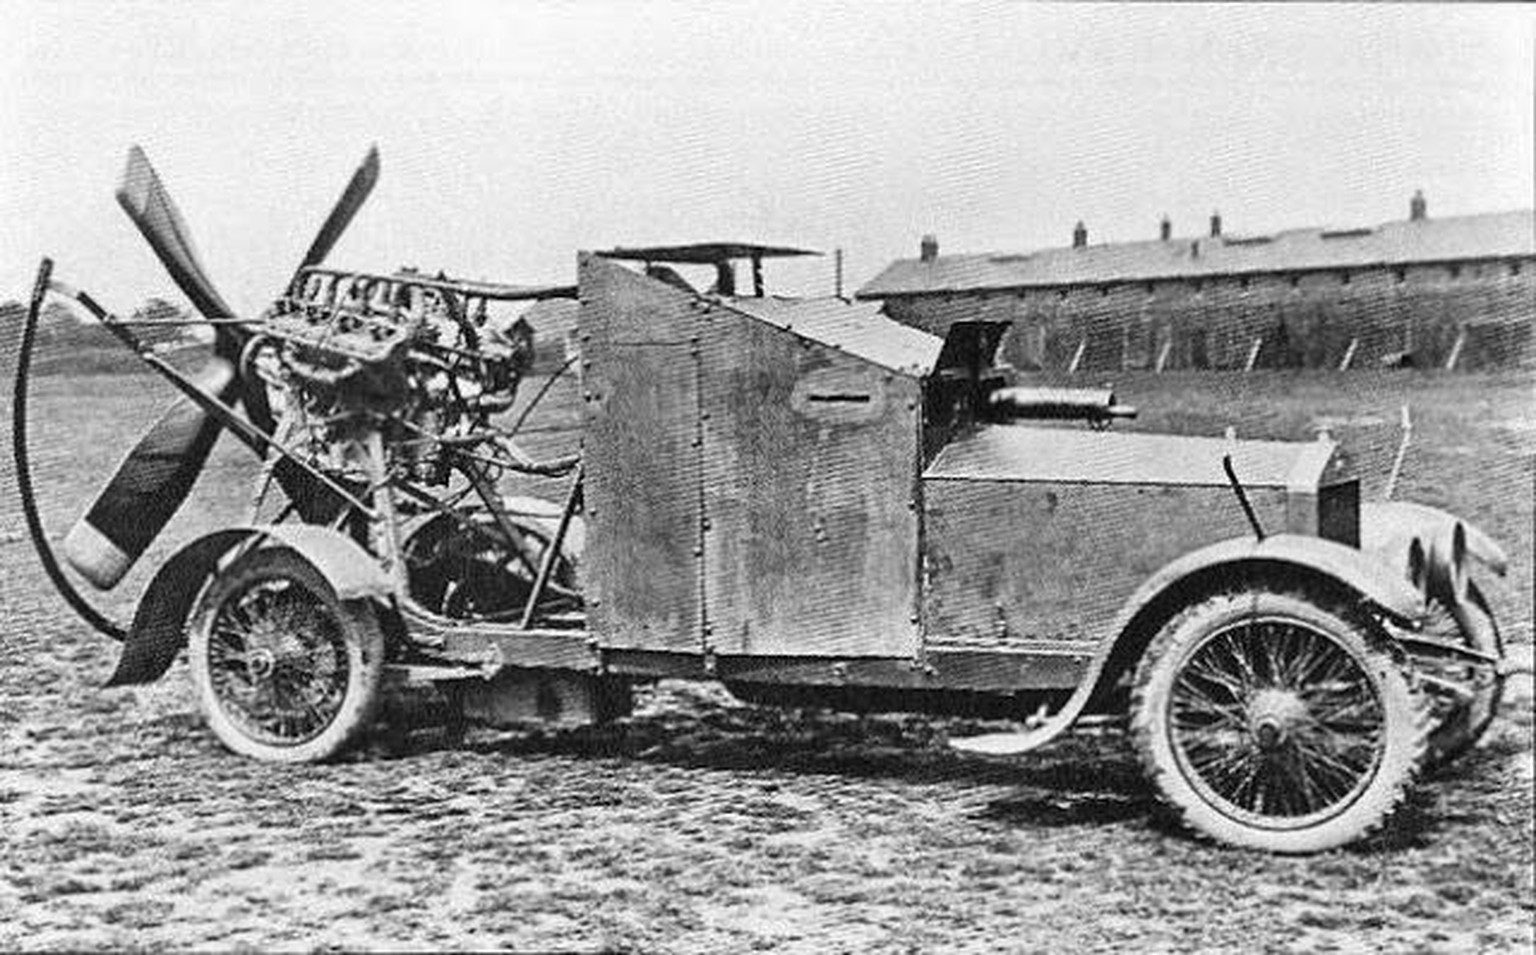 The Sizaire-Berwick armoured Car in France in 1915. 
http://www.cappittomihai.com/tag/macchina-vecchia/